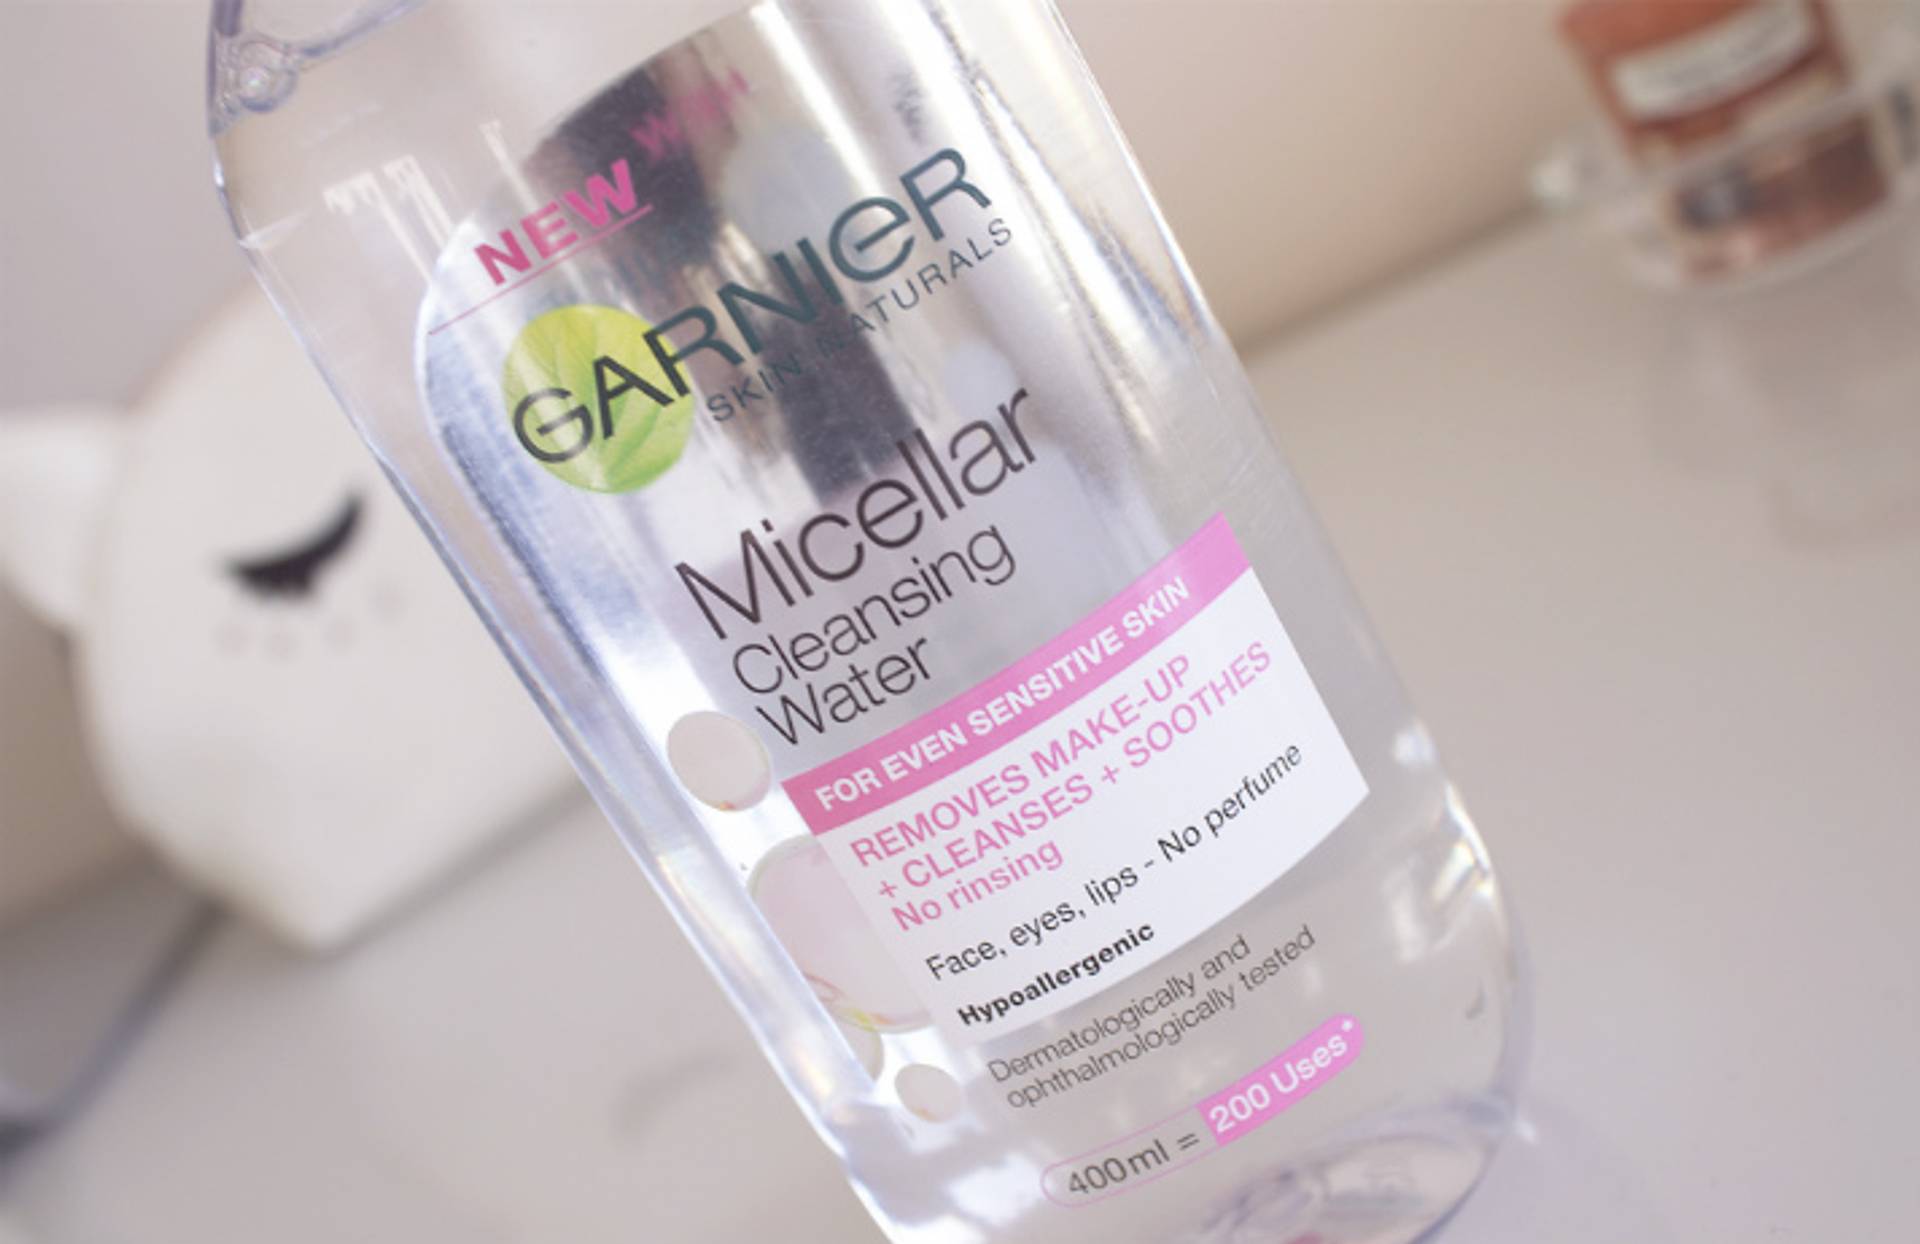 Micellar water is an all-in-one skincare product